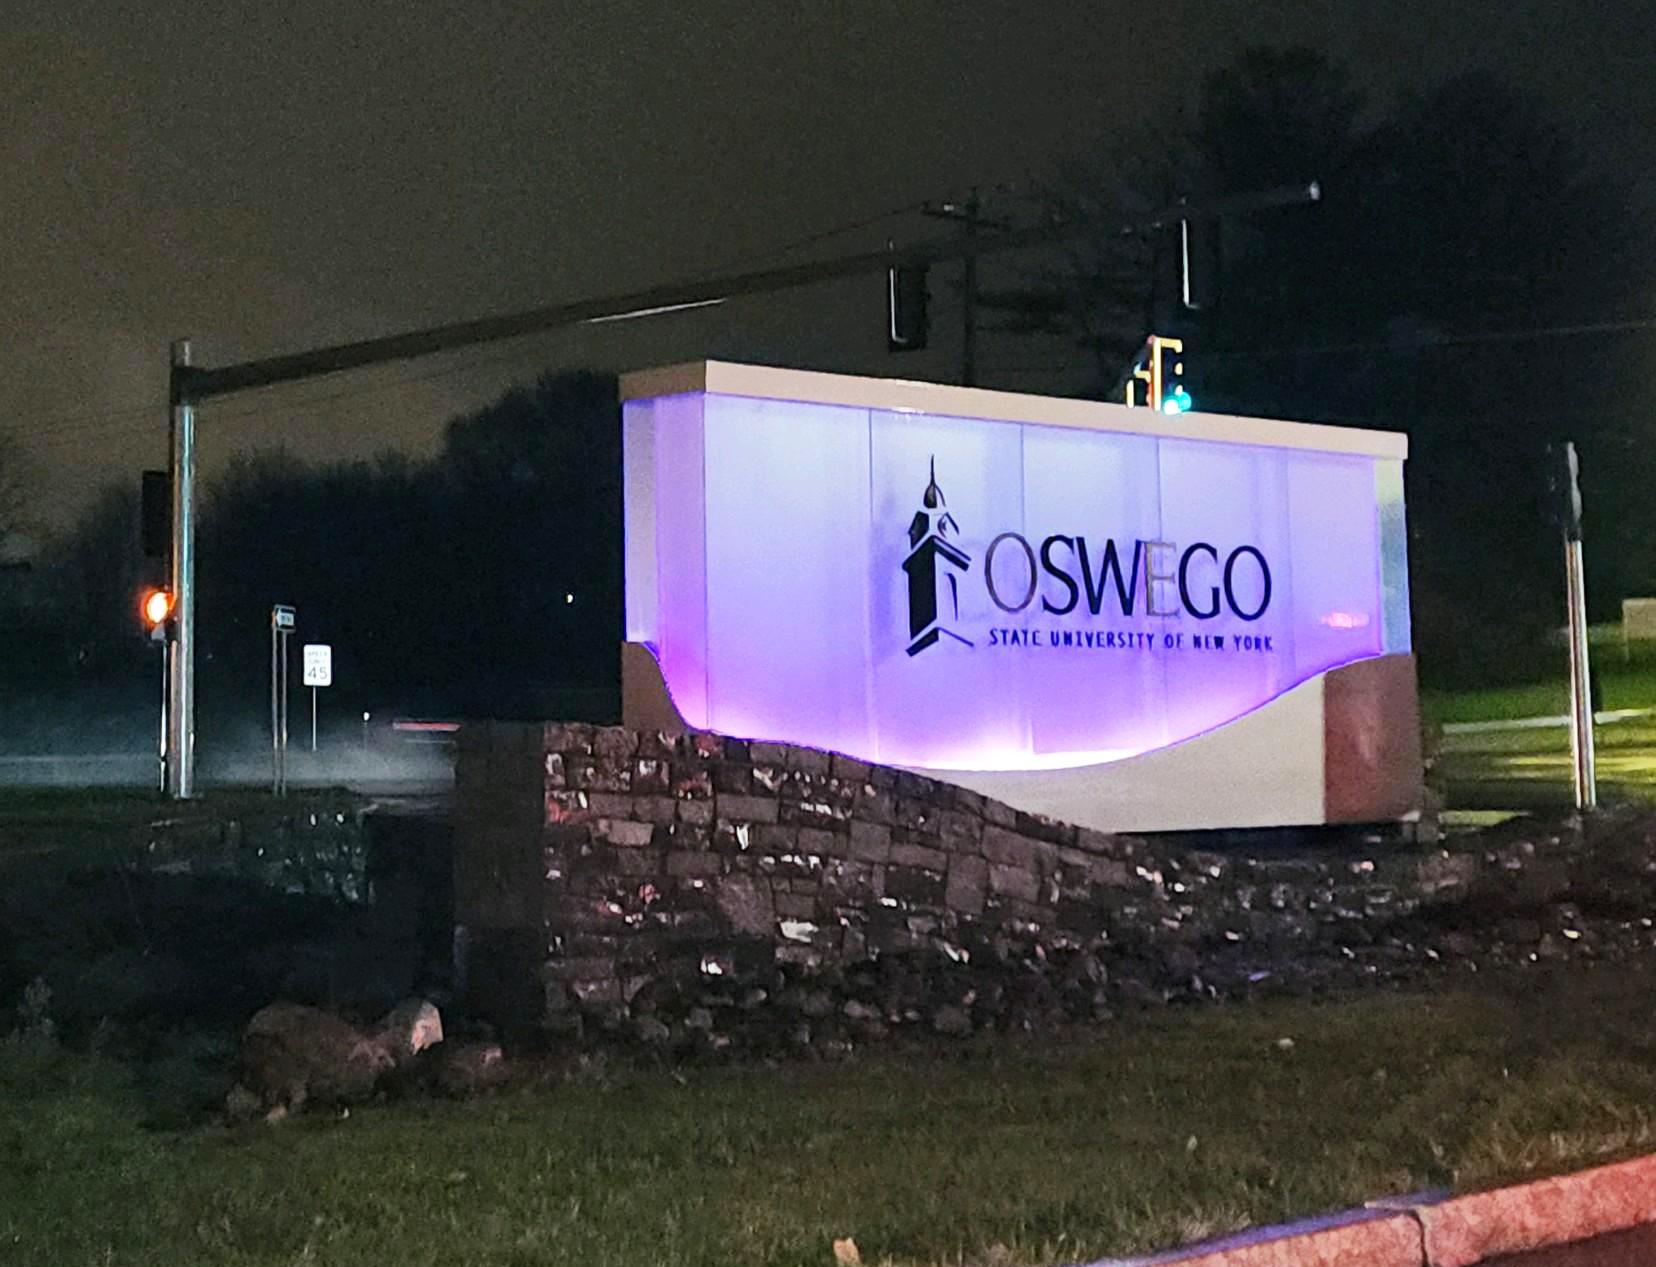 SUNY Oswego sign lit up in purple to recognize World Pancreatic Cancer Day